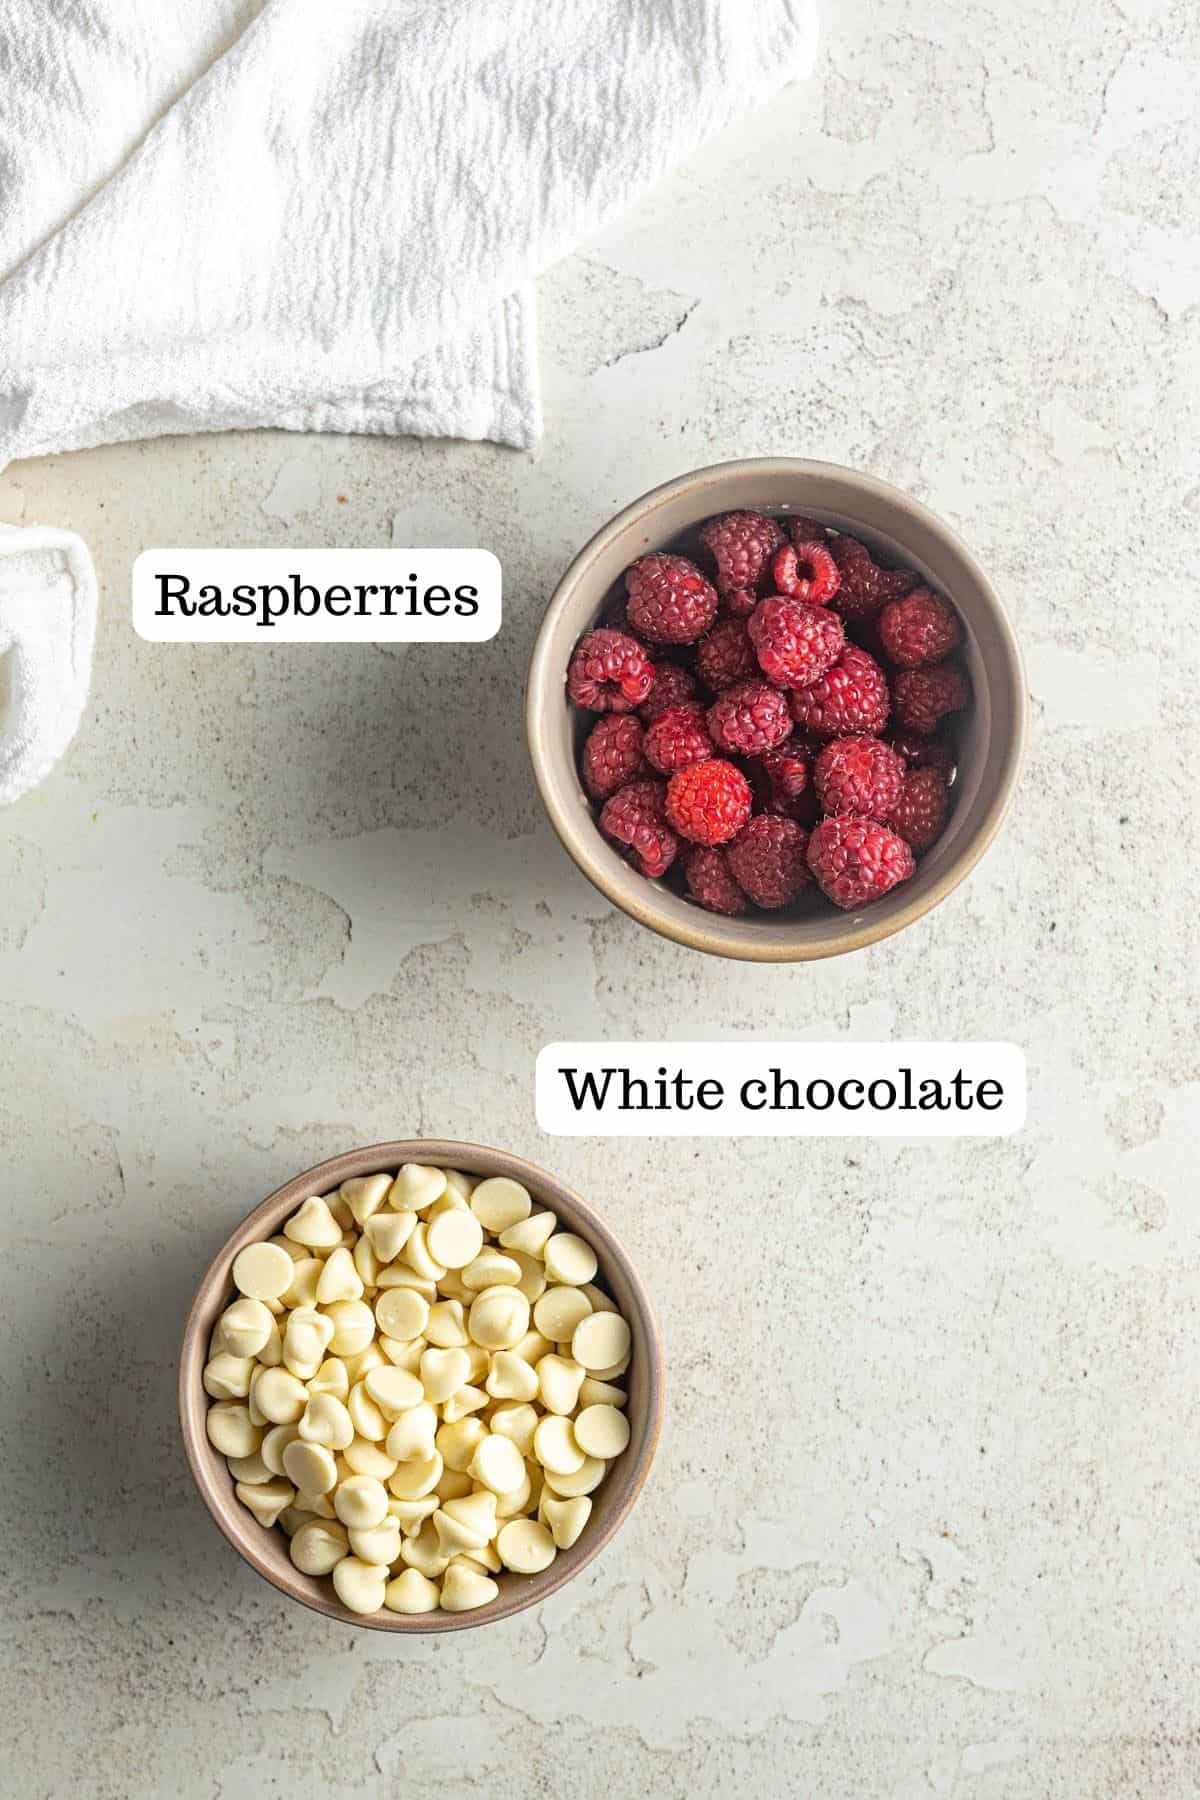 Image showing bowls with raspberries and white chocolate chips for White Chocolate Raspberry Blondies.